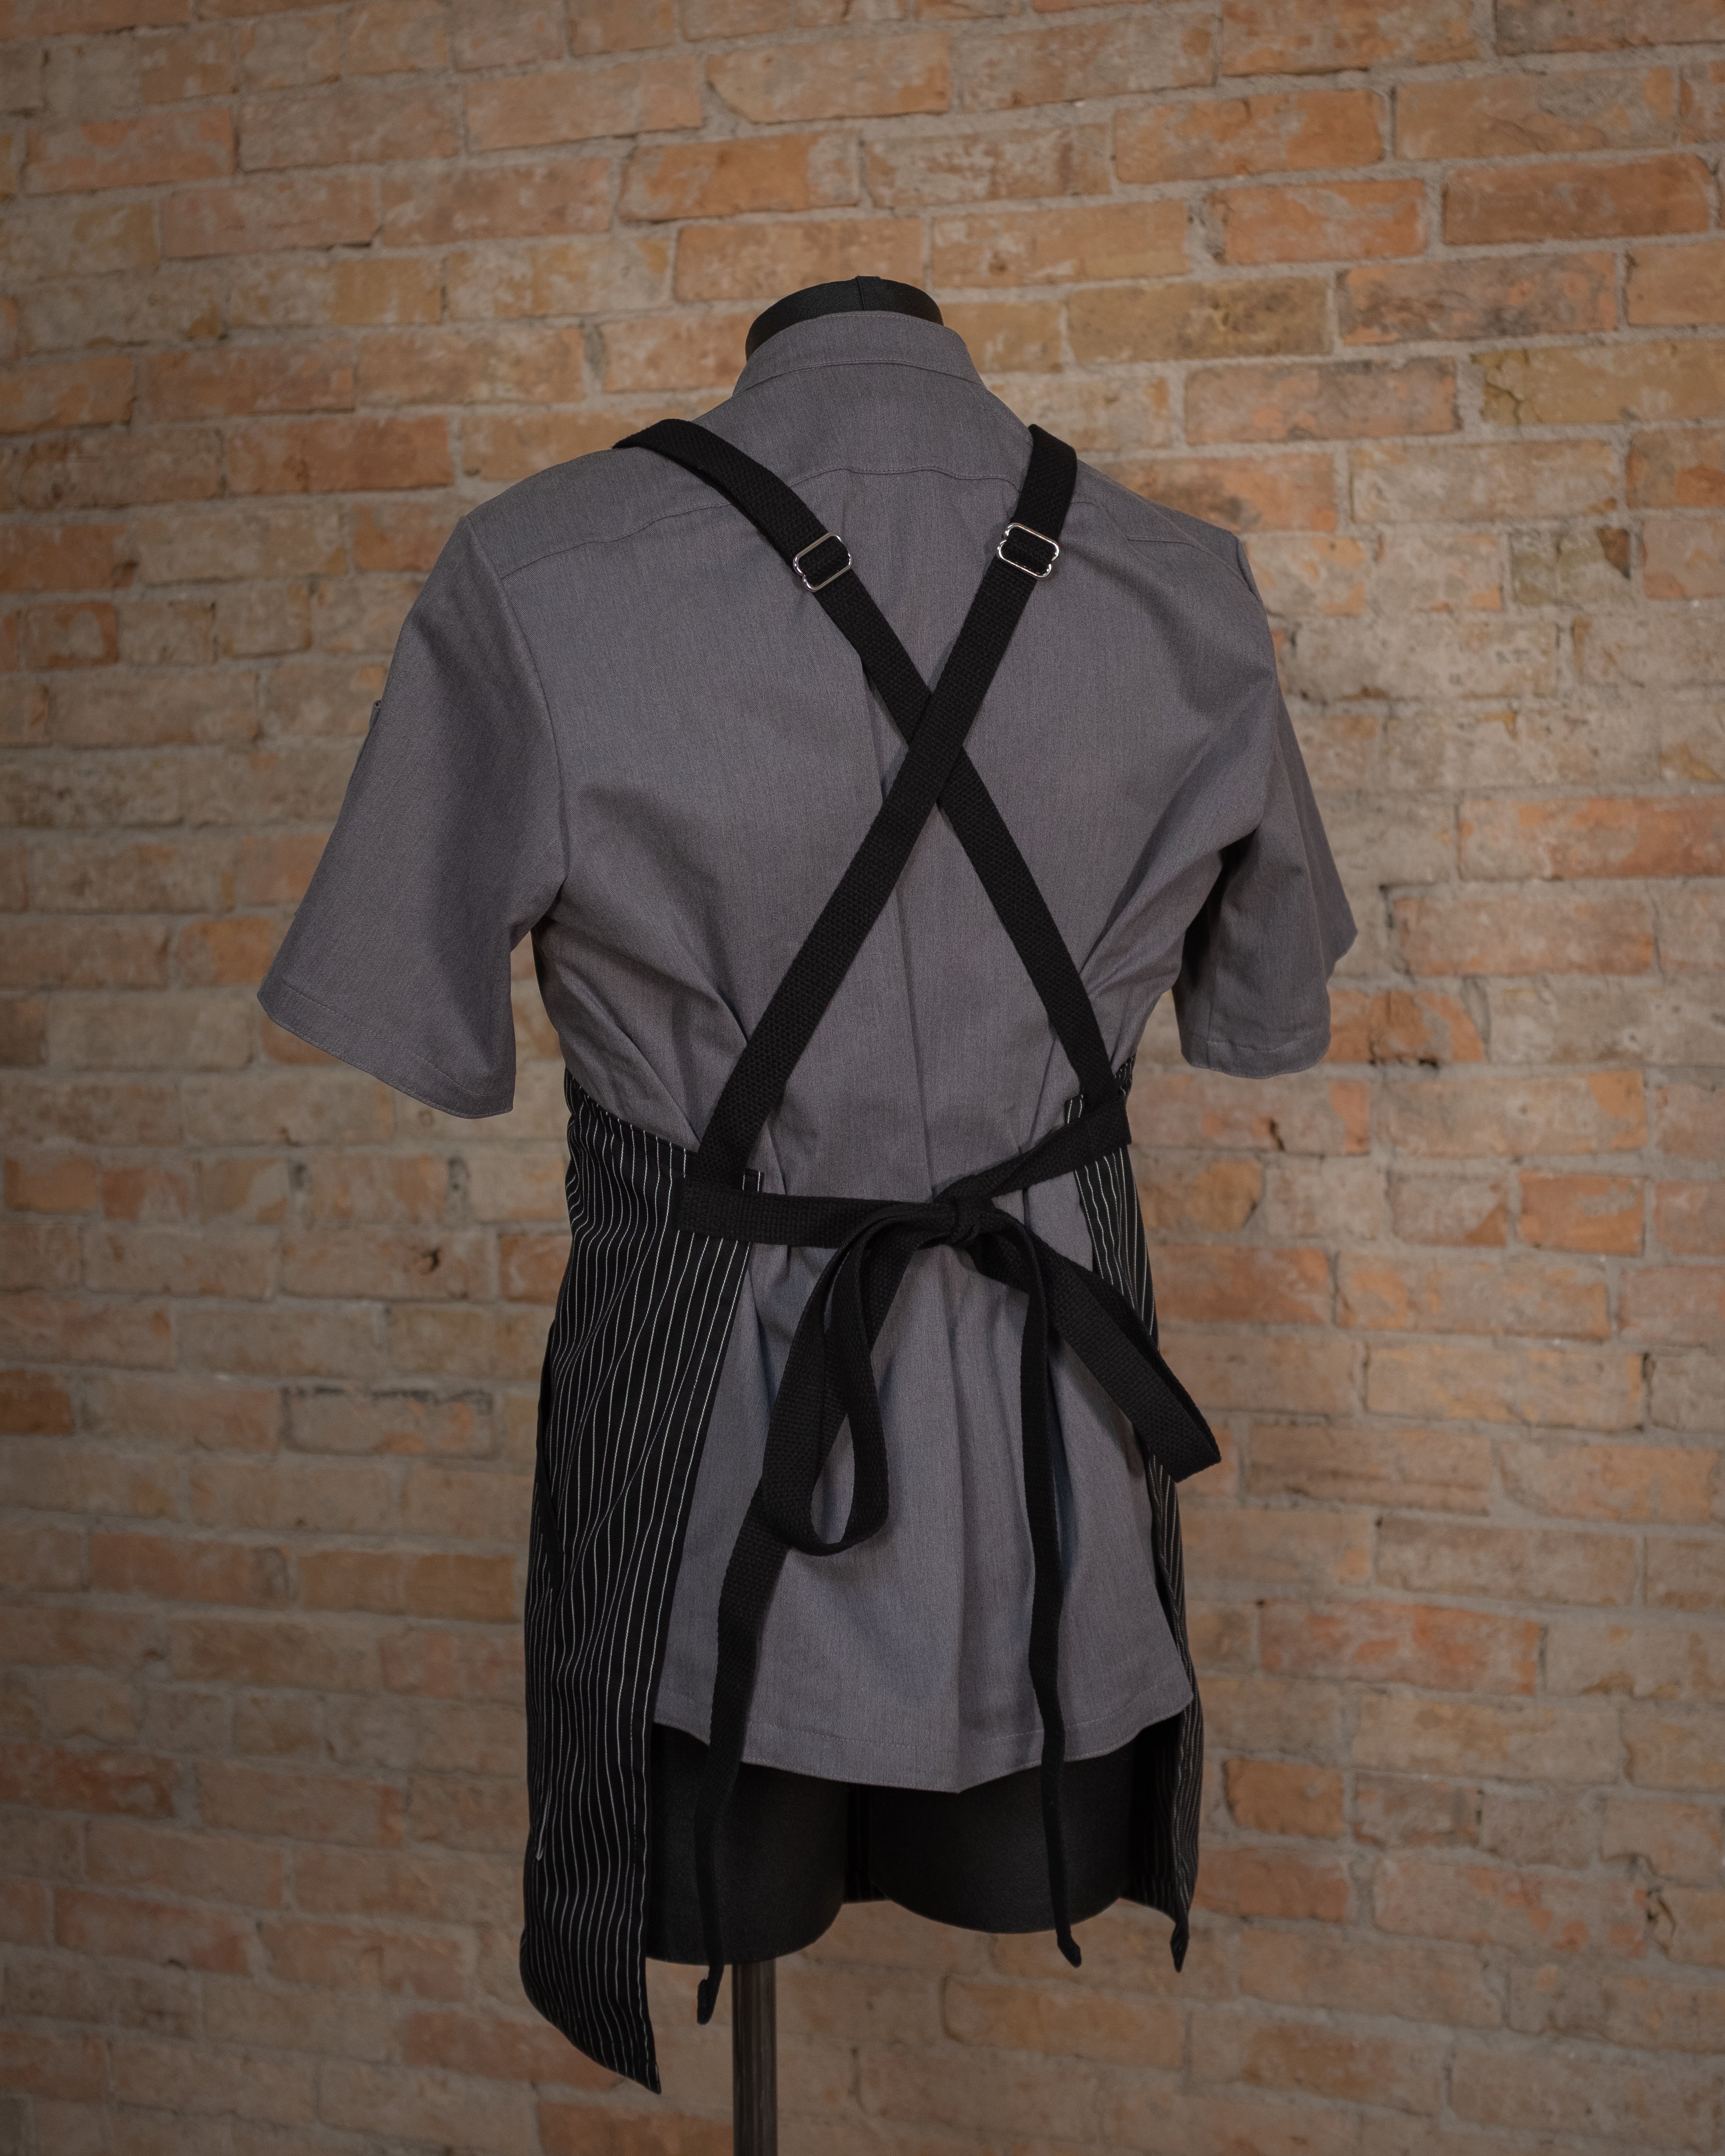 Poly/cotton twill crossback apron from Craftmade Aprons, Minnesota, displayed on a mannequin over a gray chef coat. The apron Culinary Gangster is shown in black from the back, displaying the black crossback strapping.